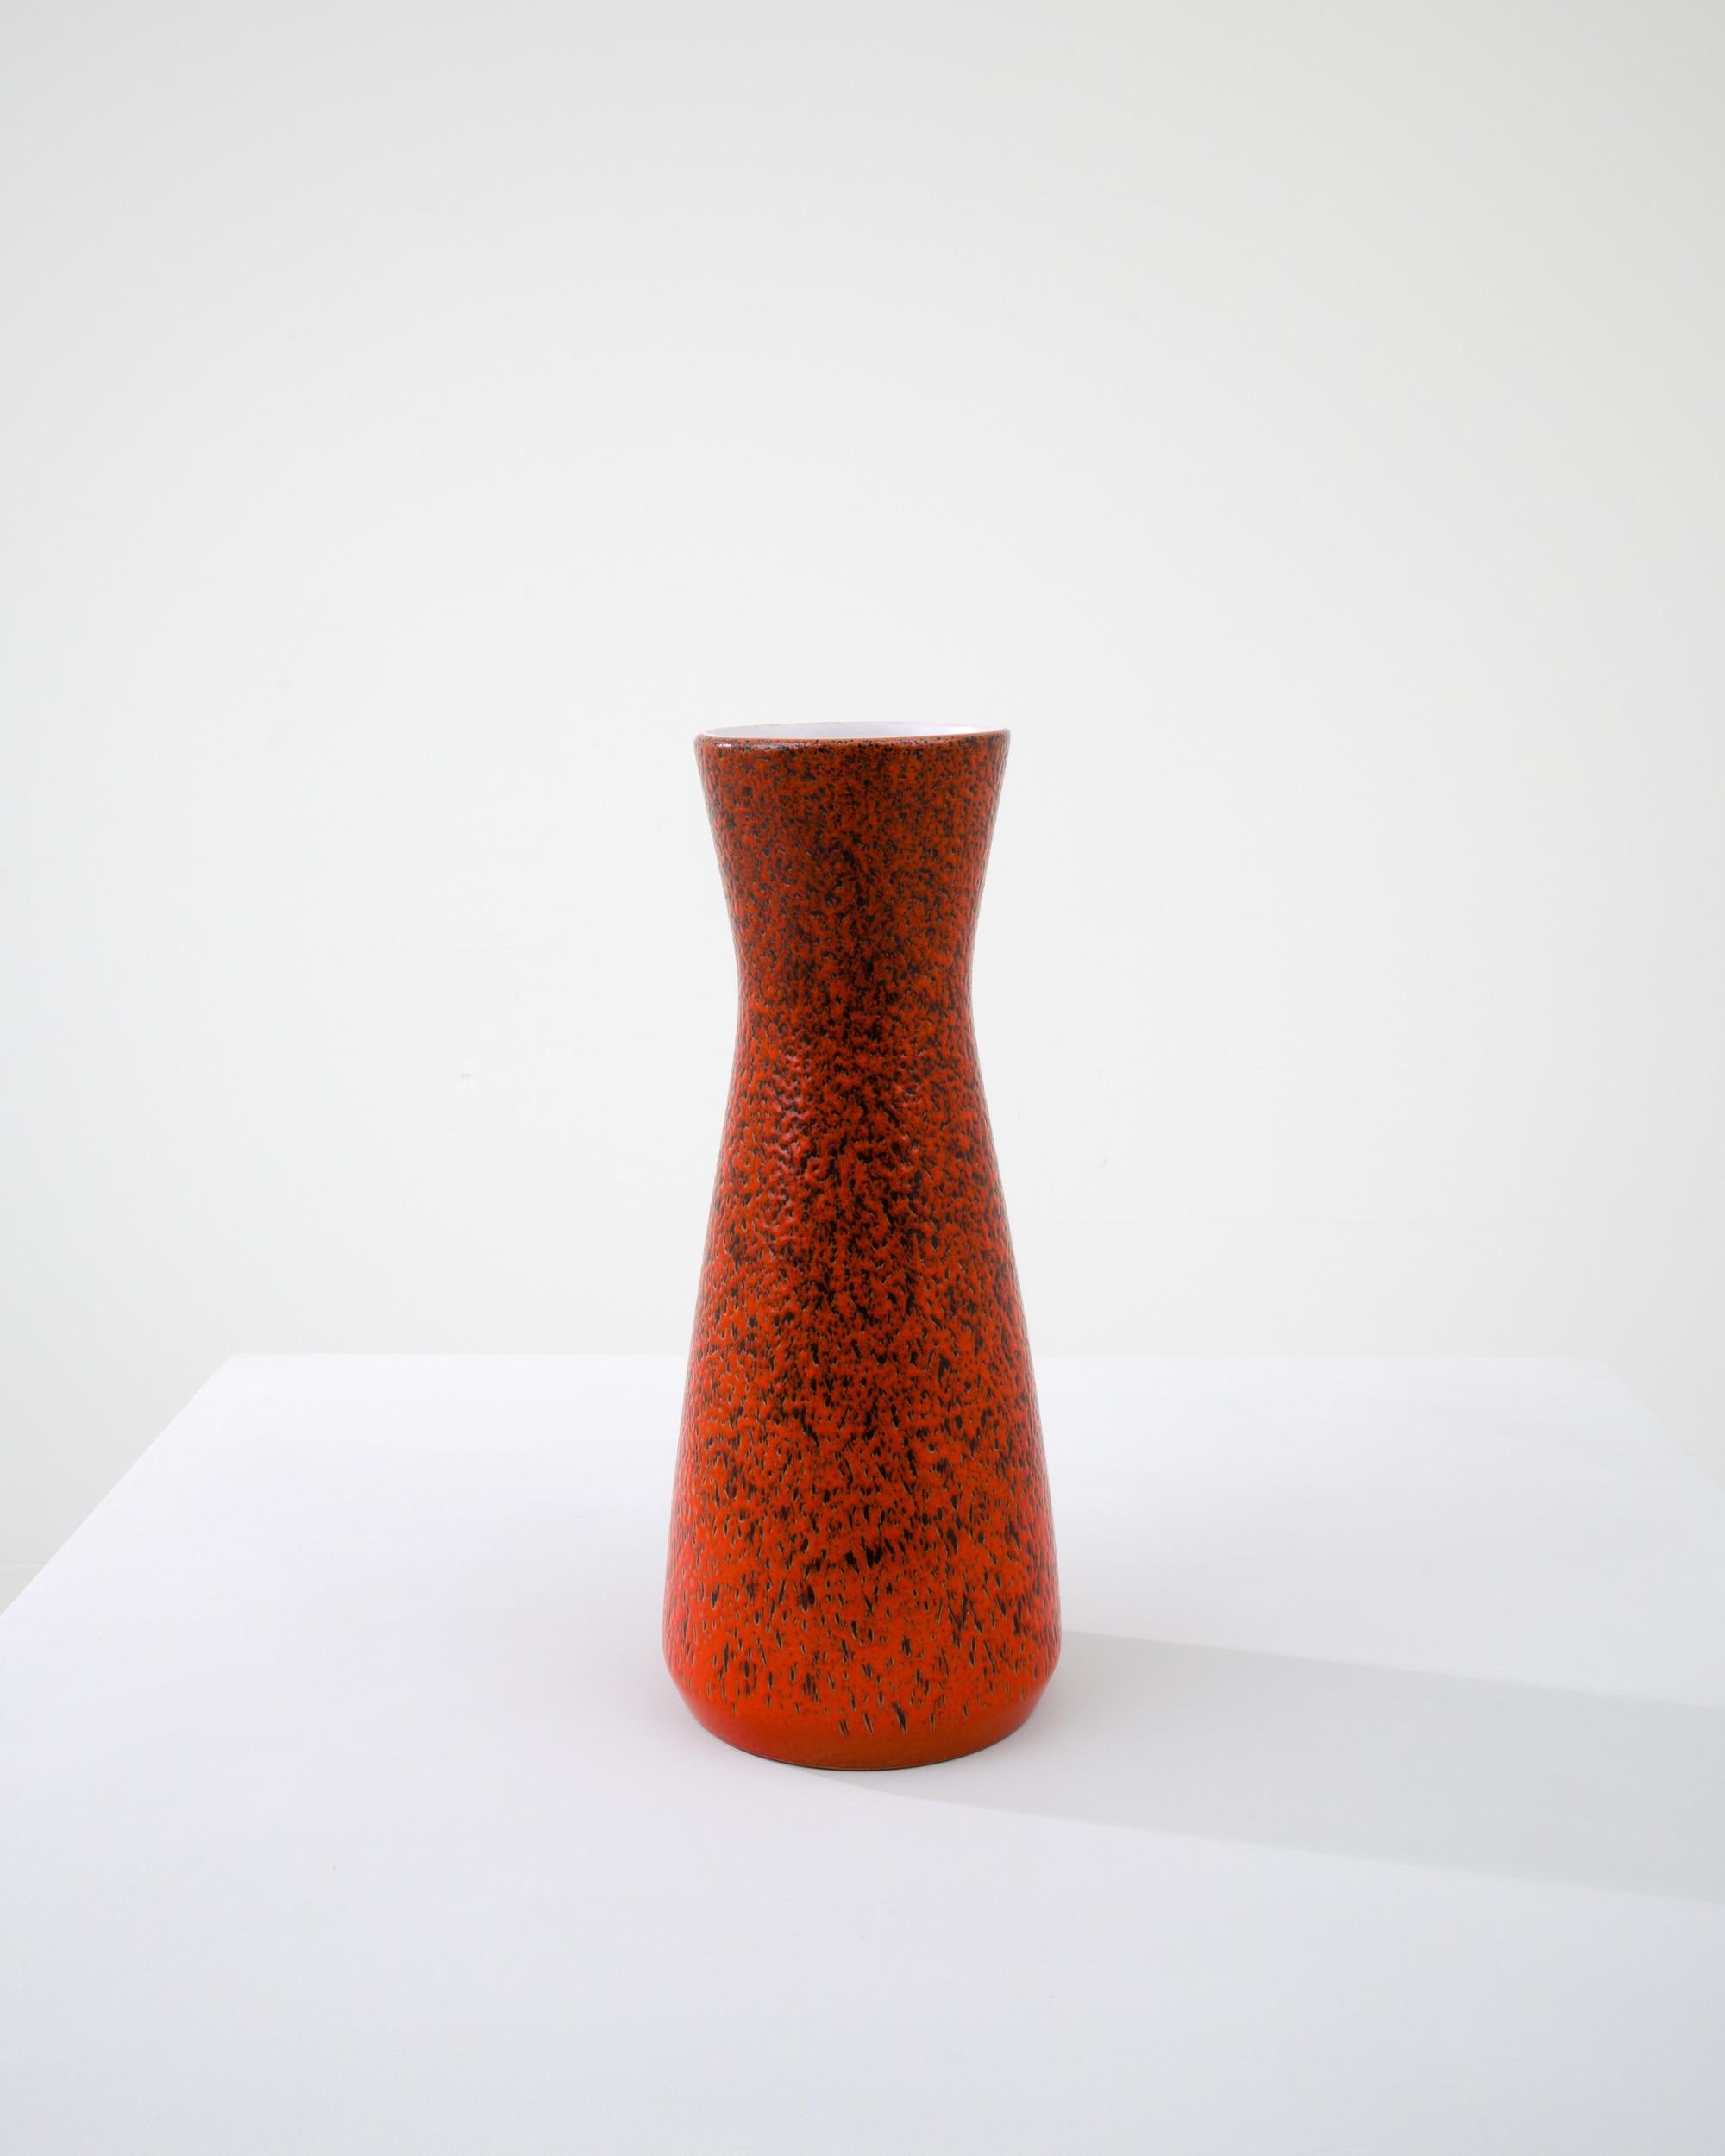 A ceramic vase from mid-20th century Germany. Neither large nor small, this studio made pot reflects the hand-held, and the handmade; the tactility of process and the artist's vision– realized on the potter’s wheel. Striking red and the minimal form